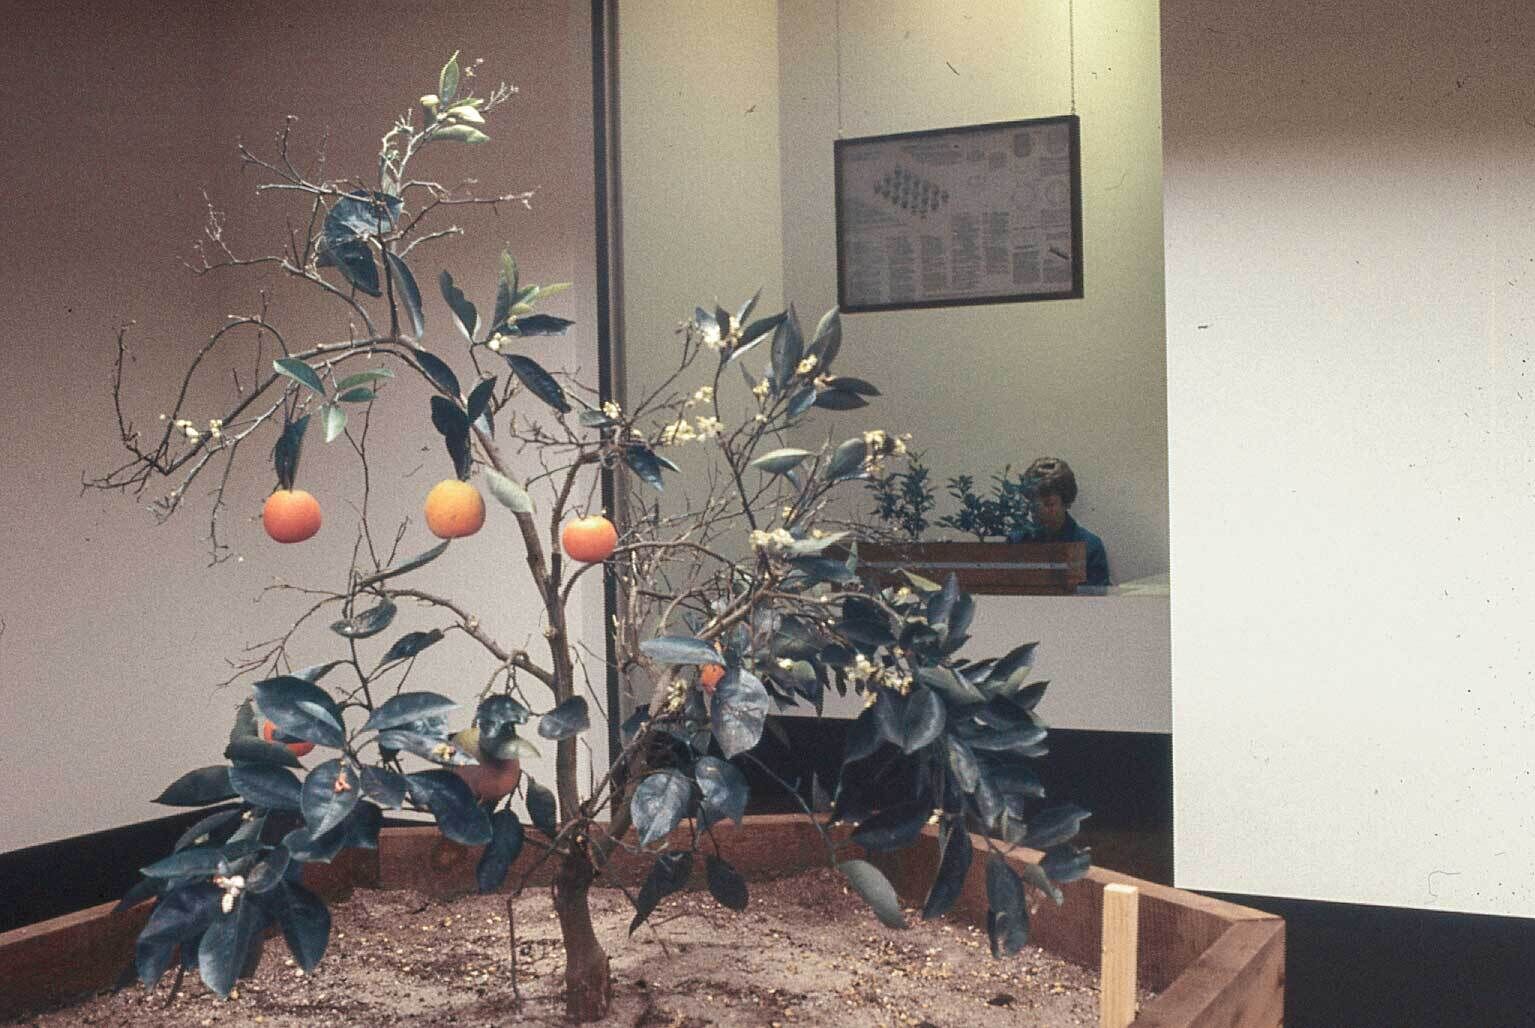 A small orange tree with ripe oranges in a wooden planter box indoors, with a person working at a desk in the background.